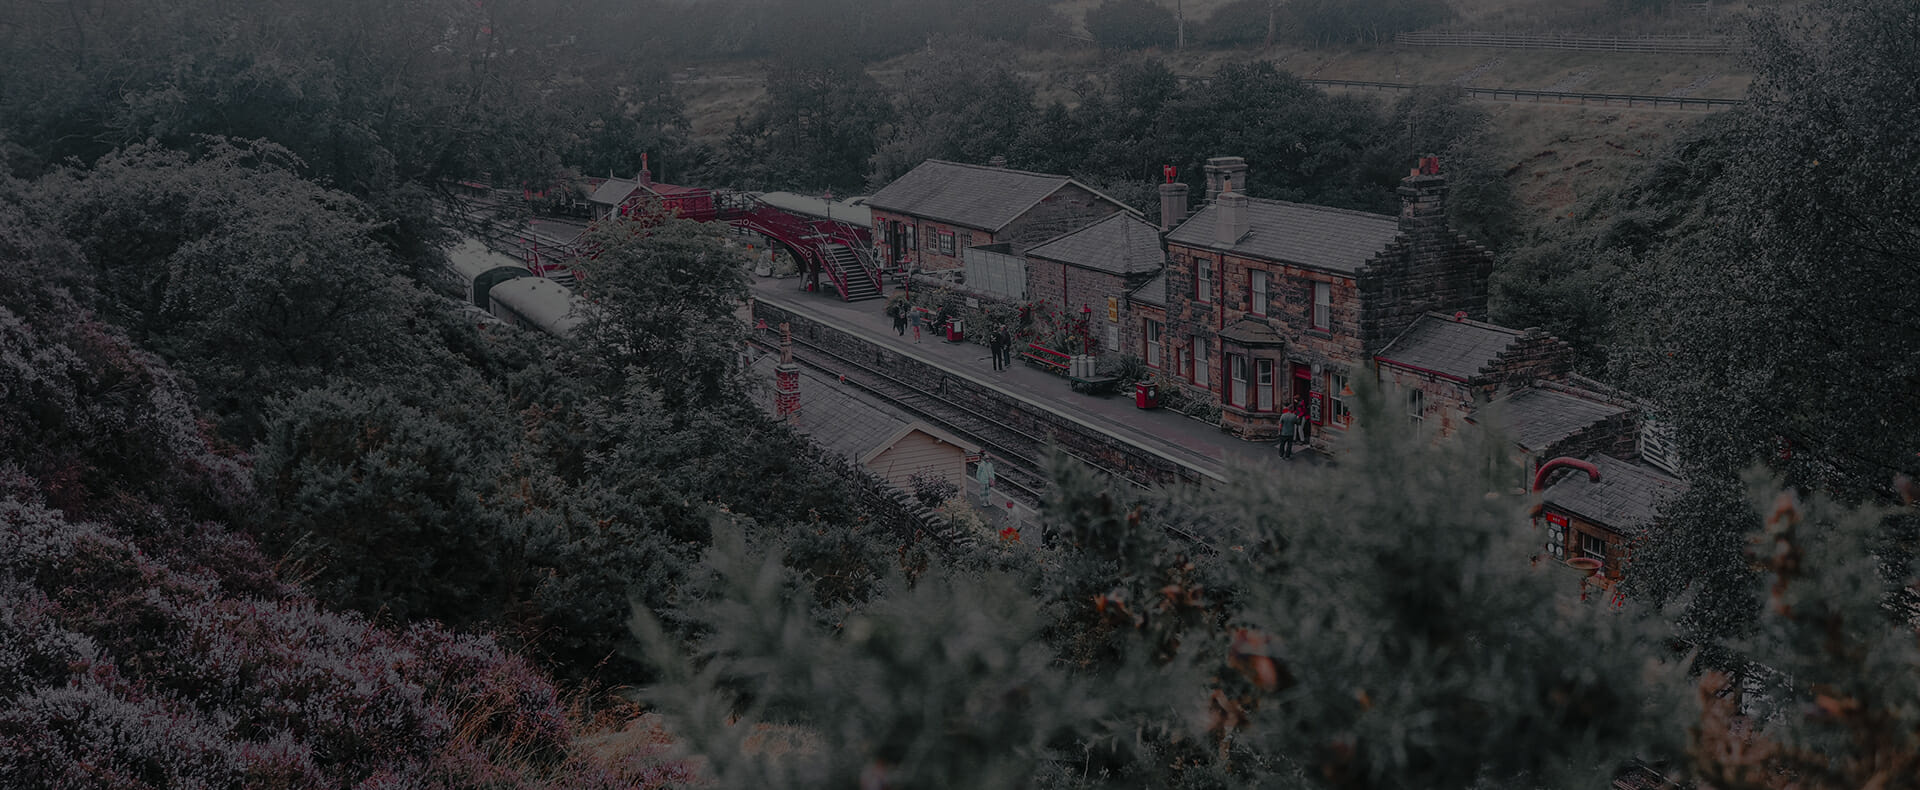 view of goathland station on british rail network with buildings and trees